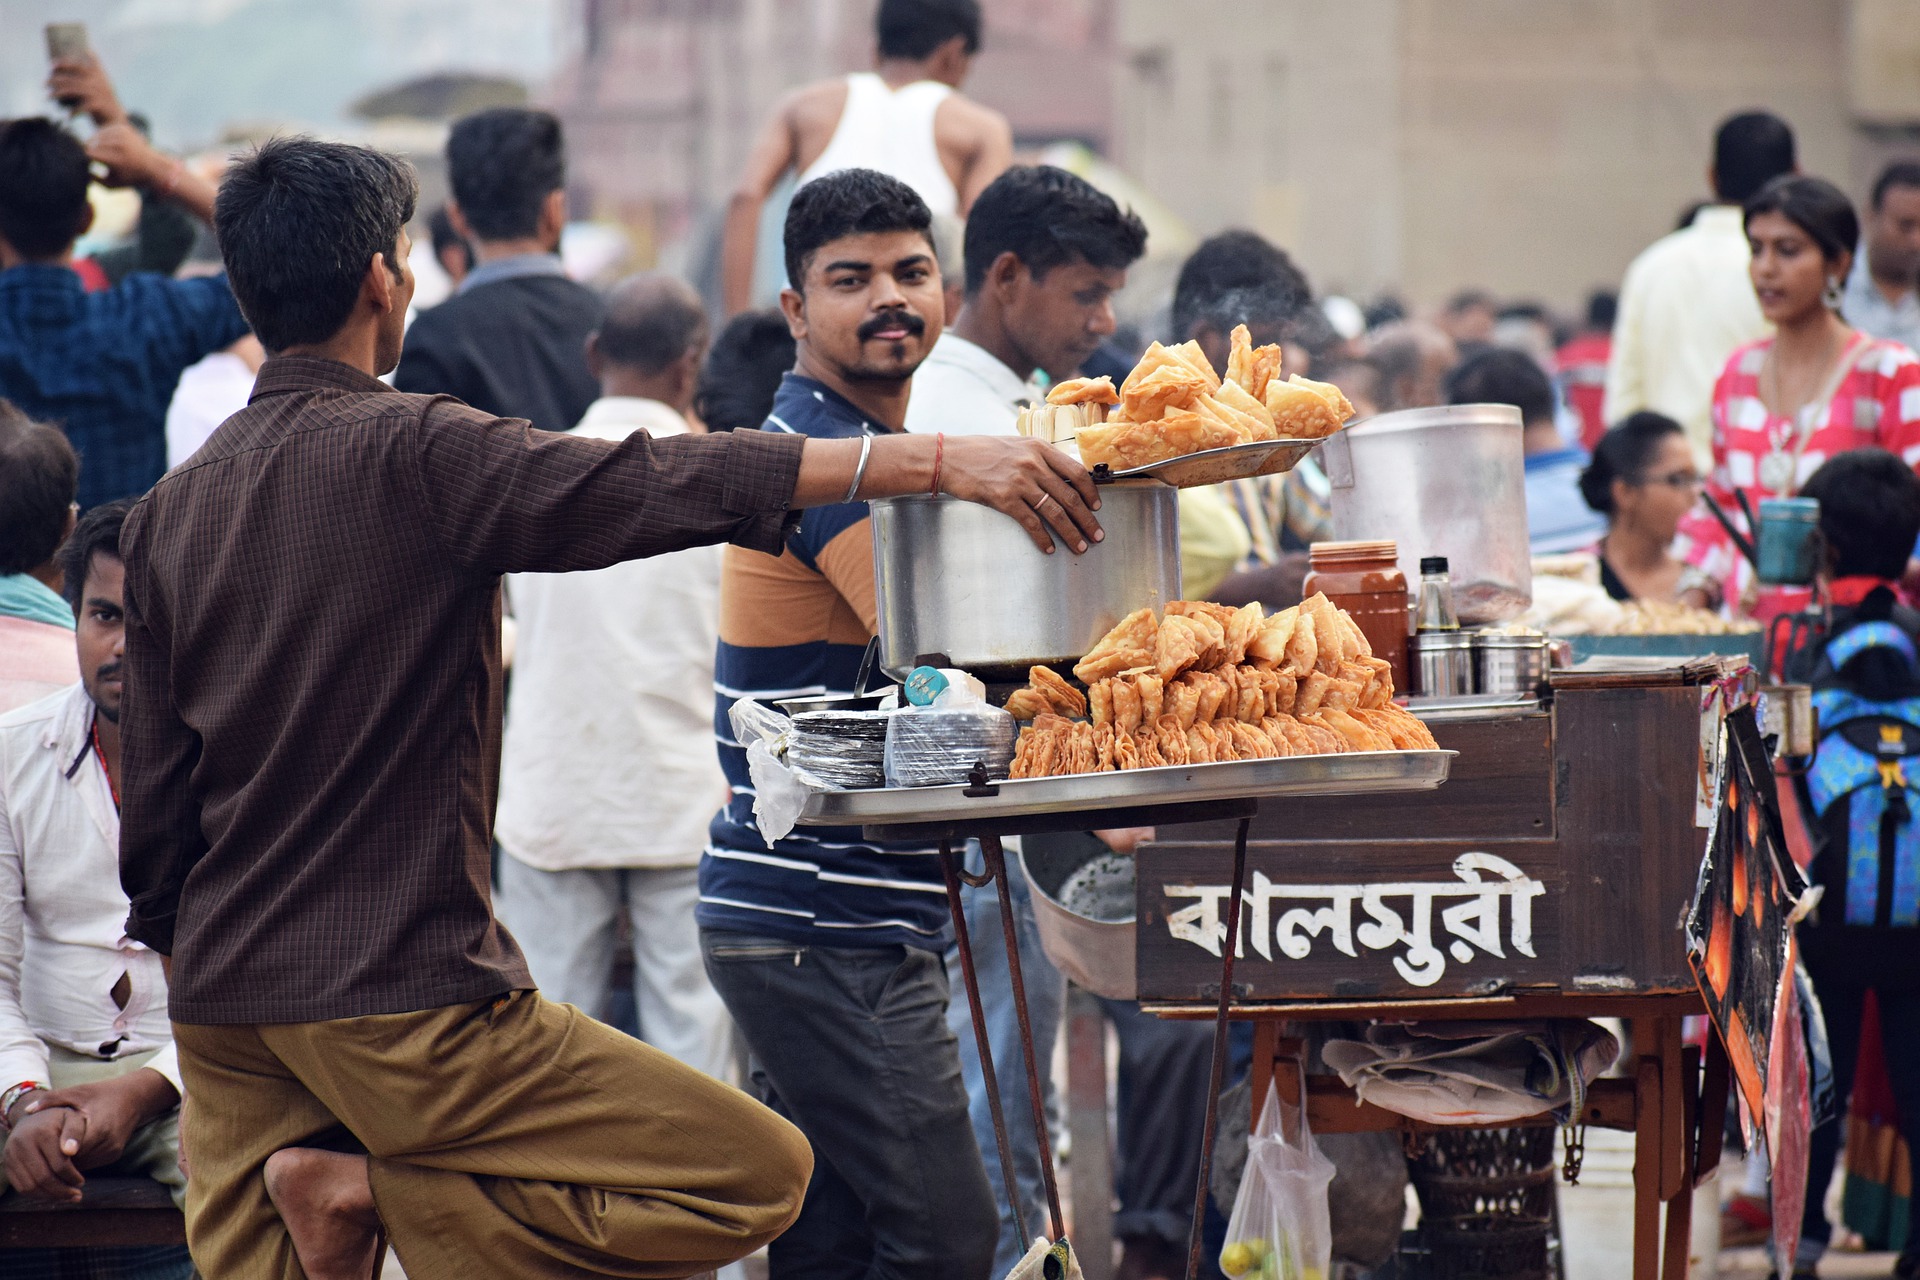 Why We Should Avoid Eating Food From Roadside Vendors?